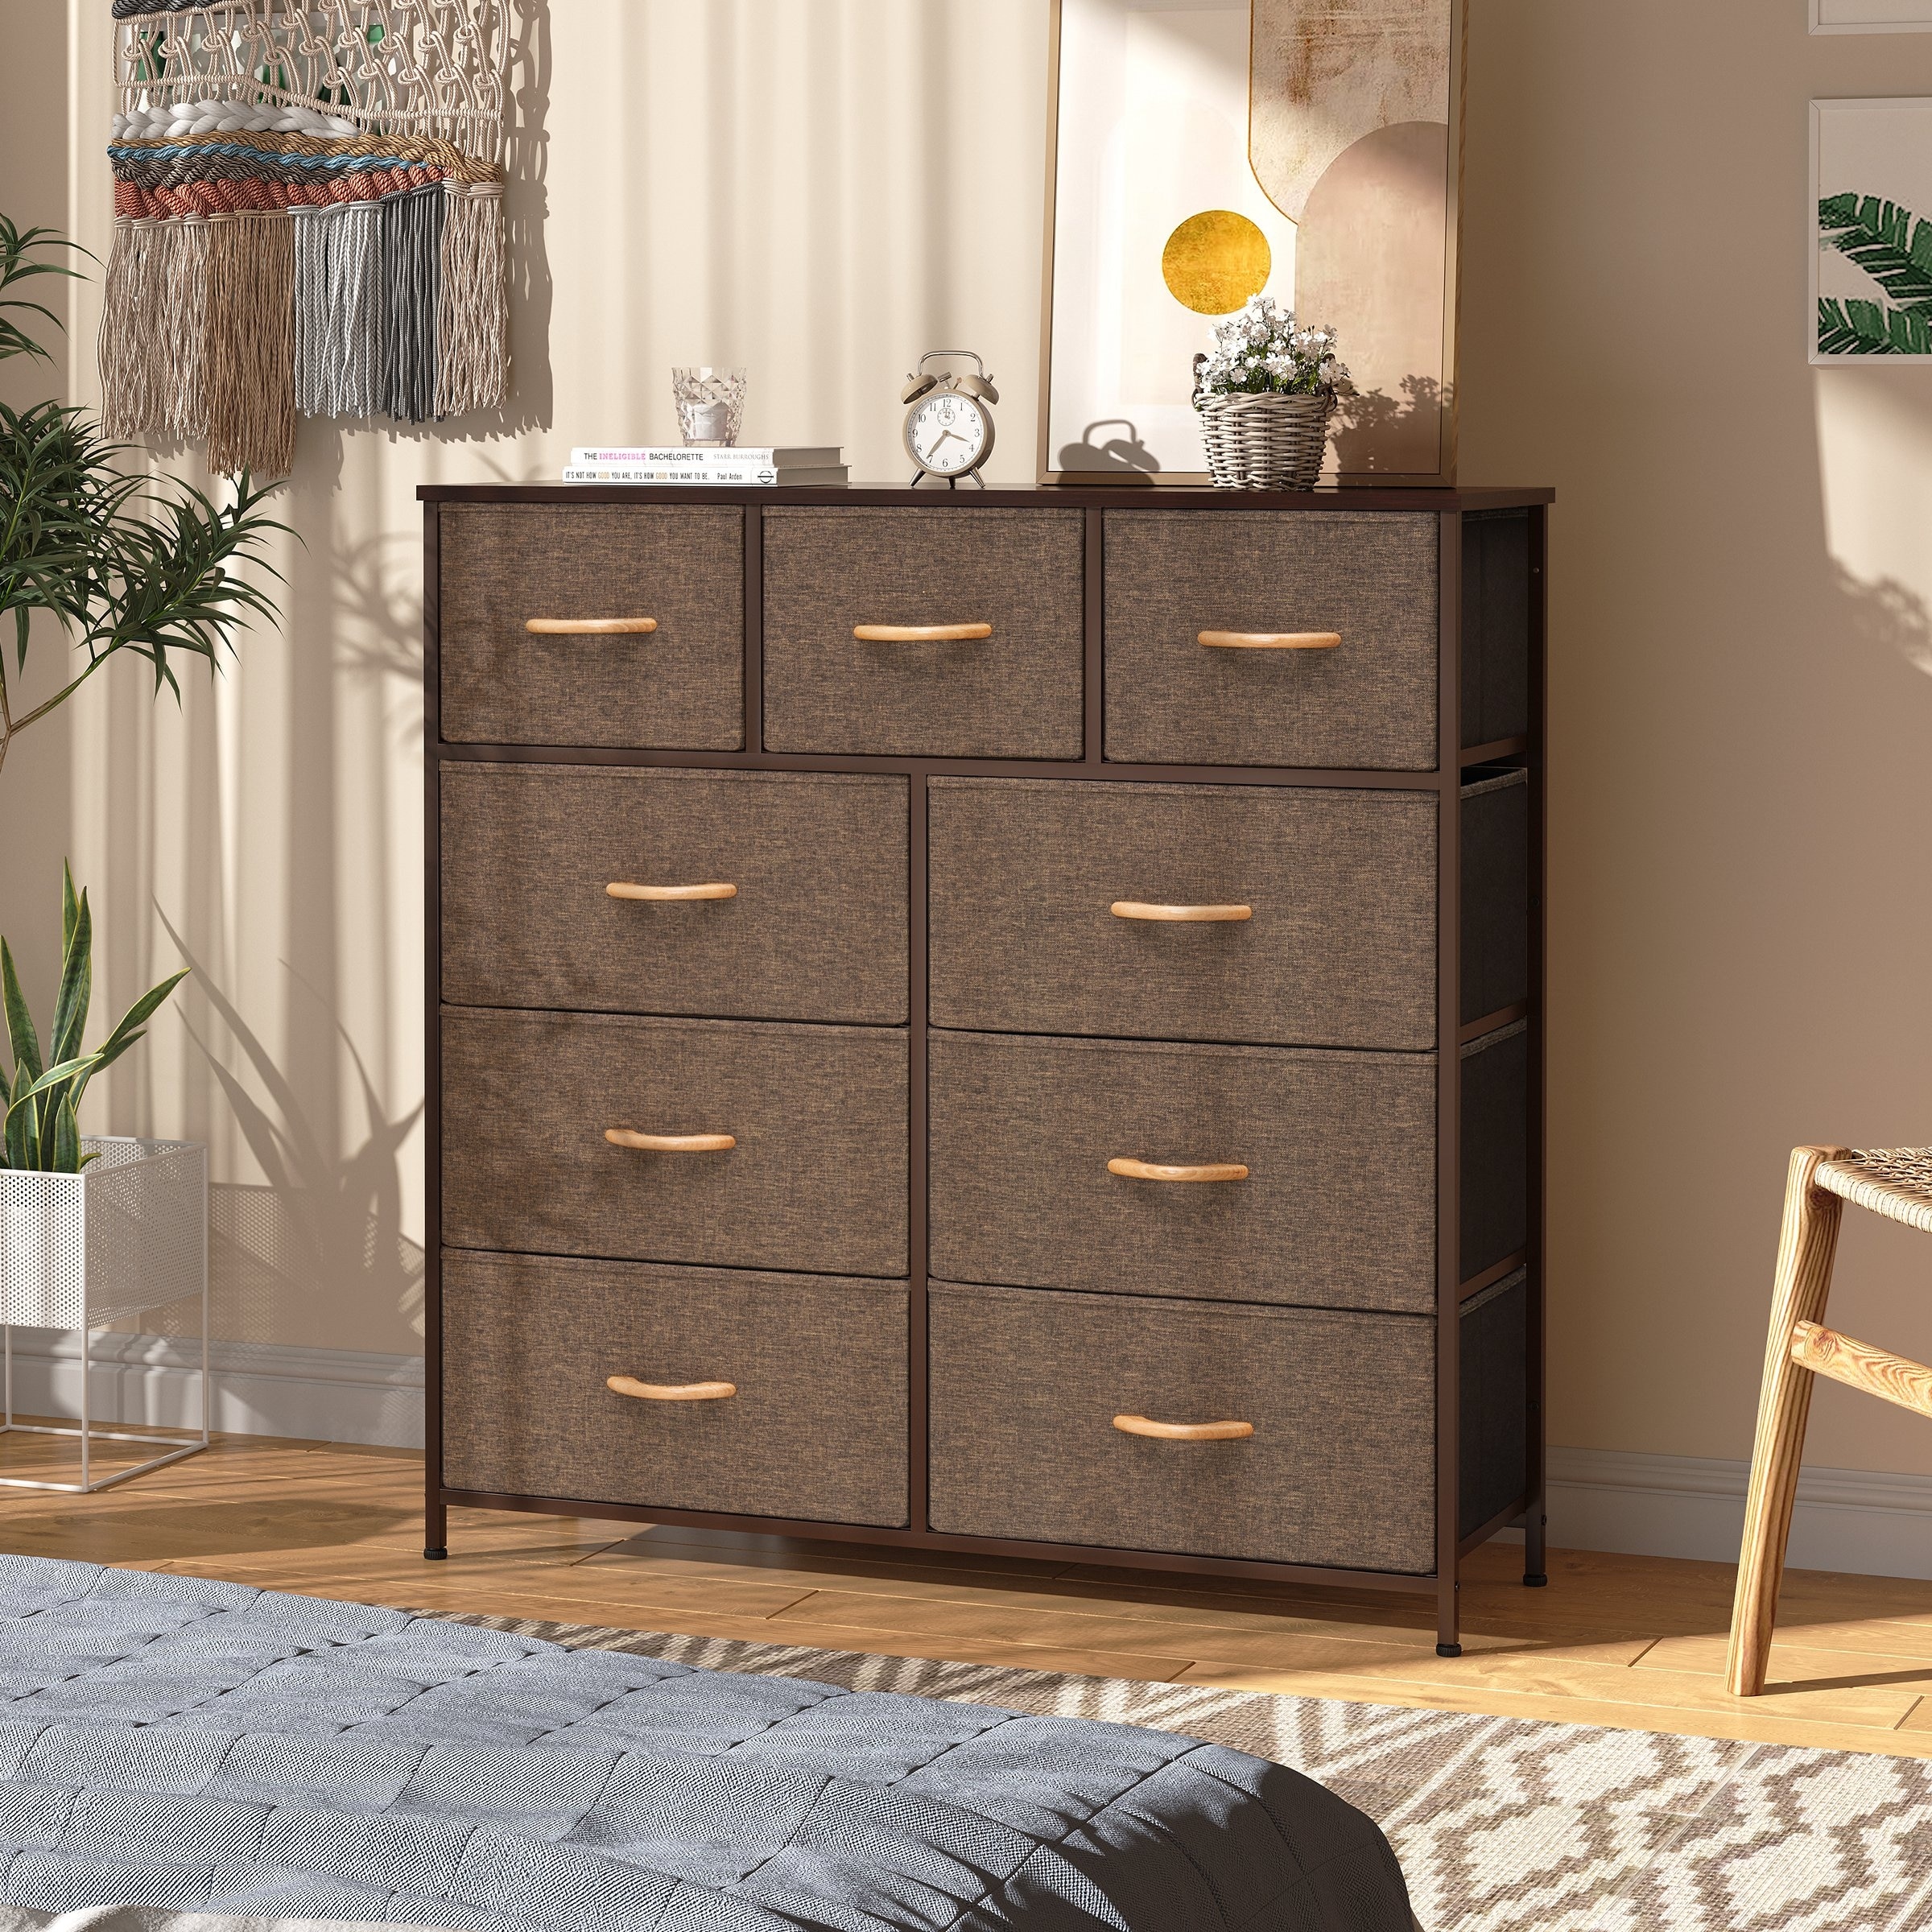 https://ak1.ostkcdn.com/images/products/is/images/direct/520eff1d0aaa5394b22f9b11fed9131ec52aca85/Home-Extra-Wide-Closet-Dresser-Storage-Tower-Organizer-Unit-9-Drawers.jpg